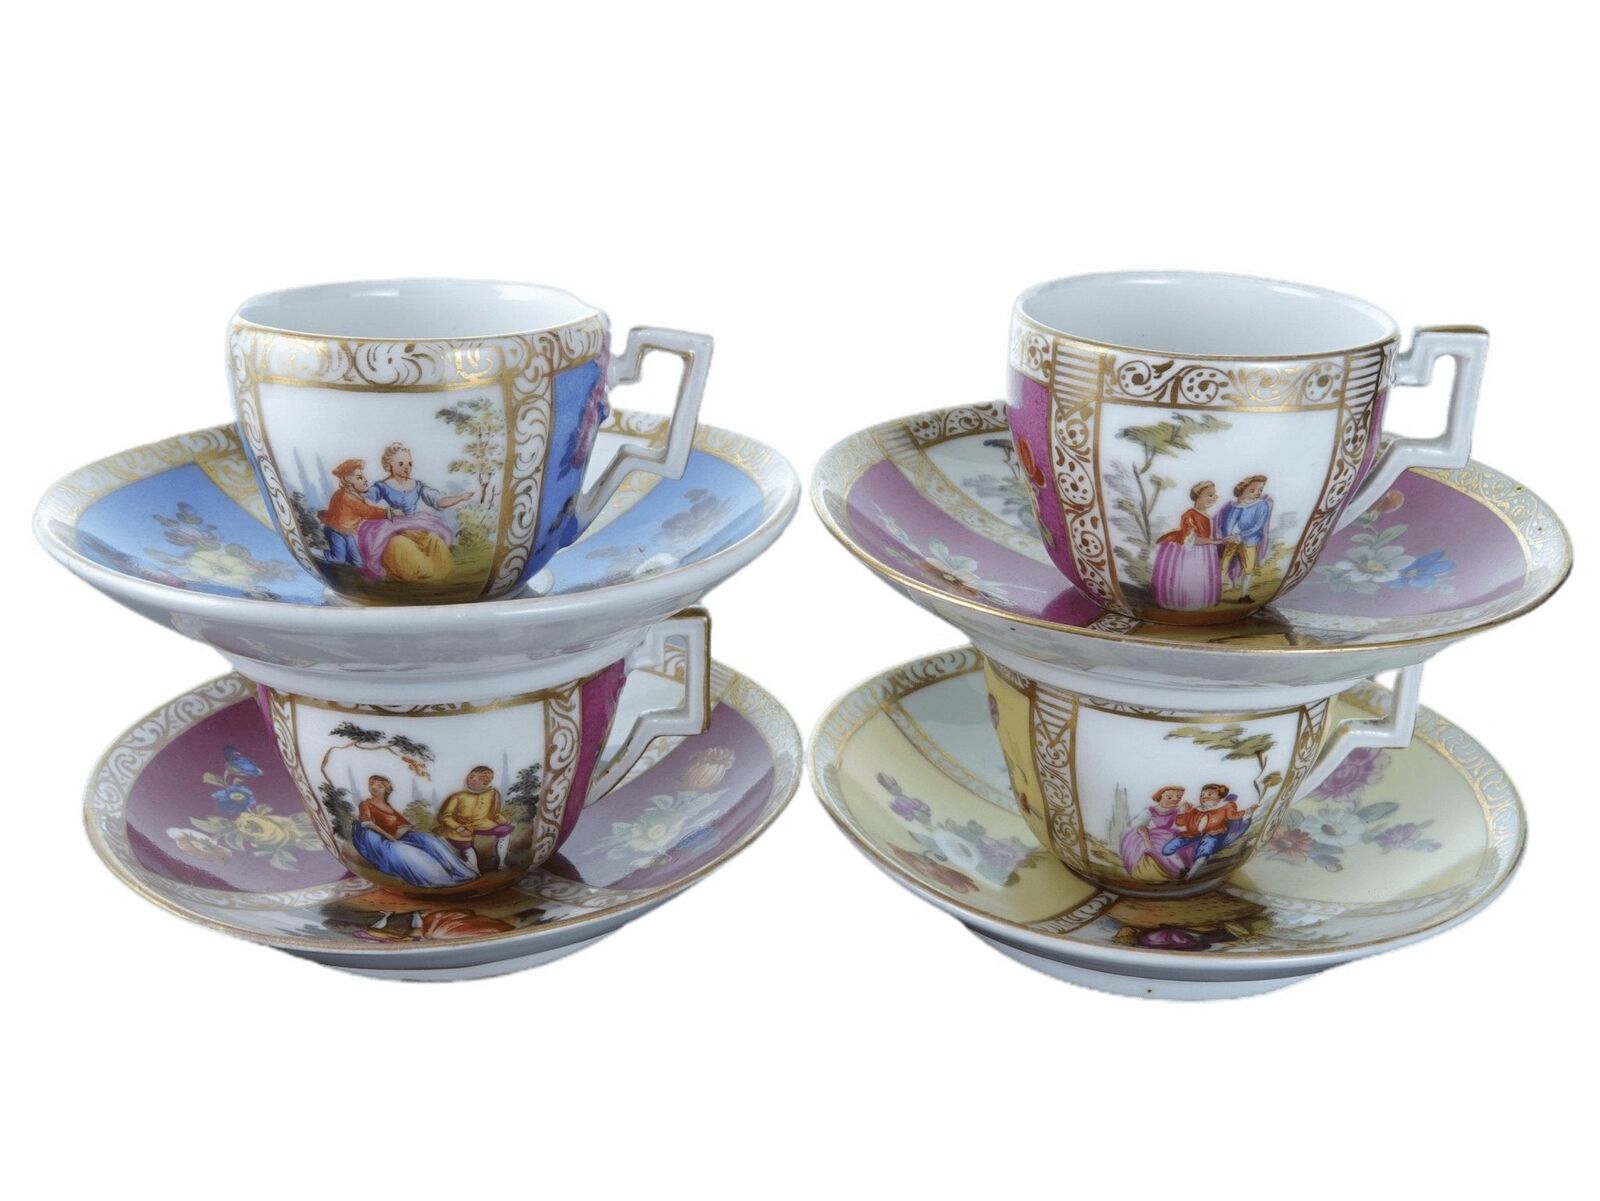 c1890 Dresden Hand Painted Demitasse or Childrens cup and saucer set of 4